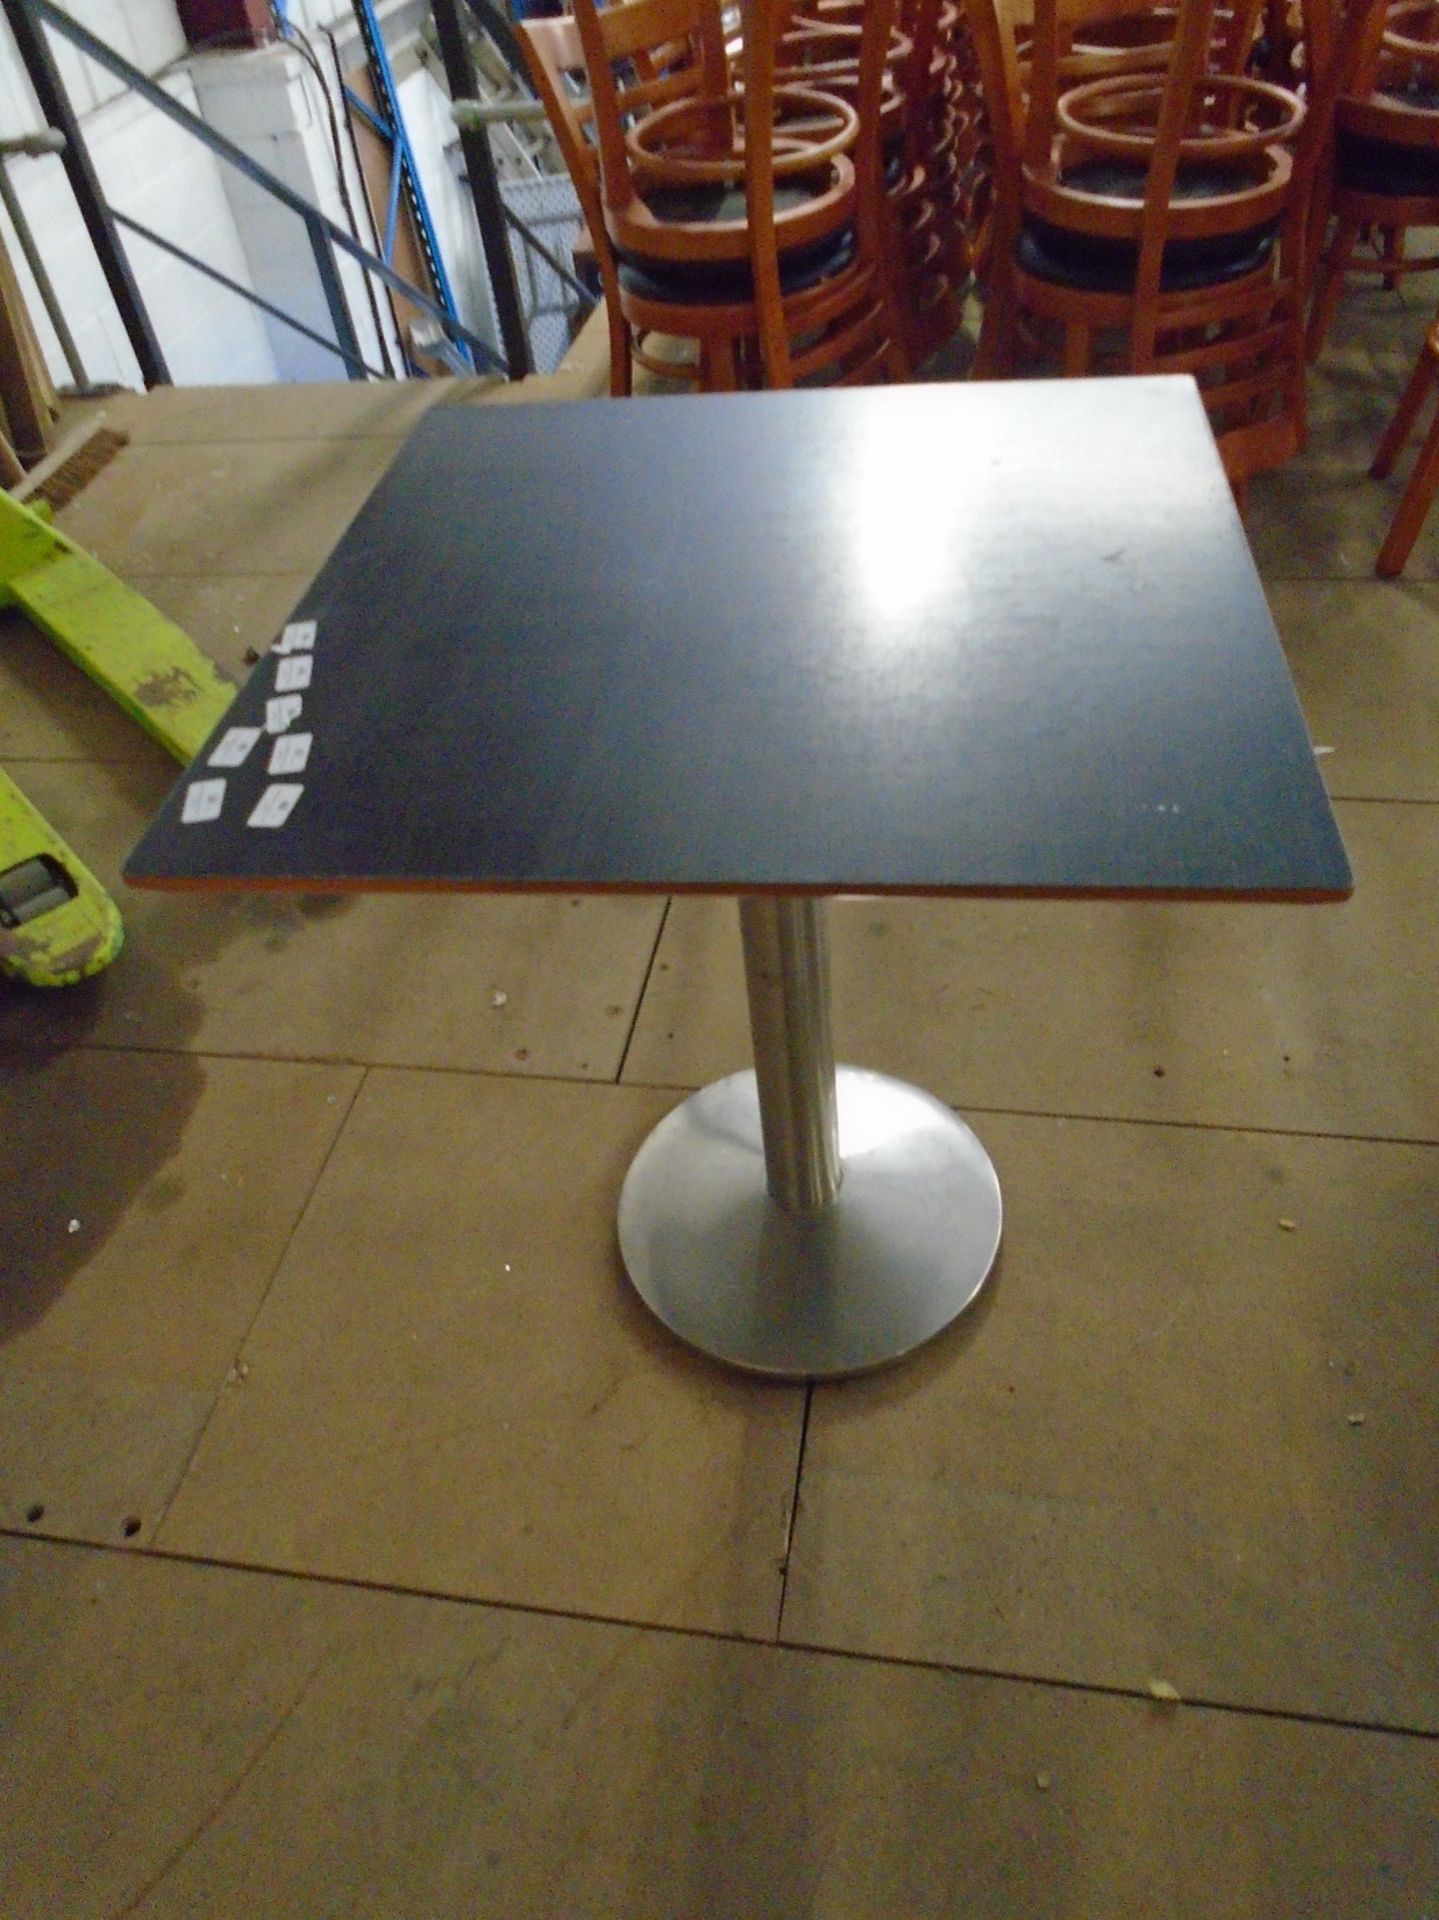 * 4 x S/S pedestal base table with 650 x 650 square tops - dark grey wood effect